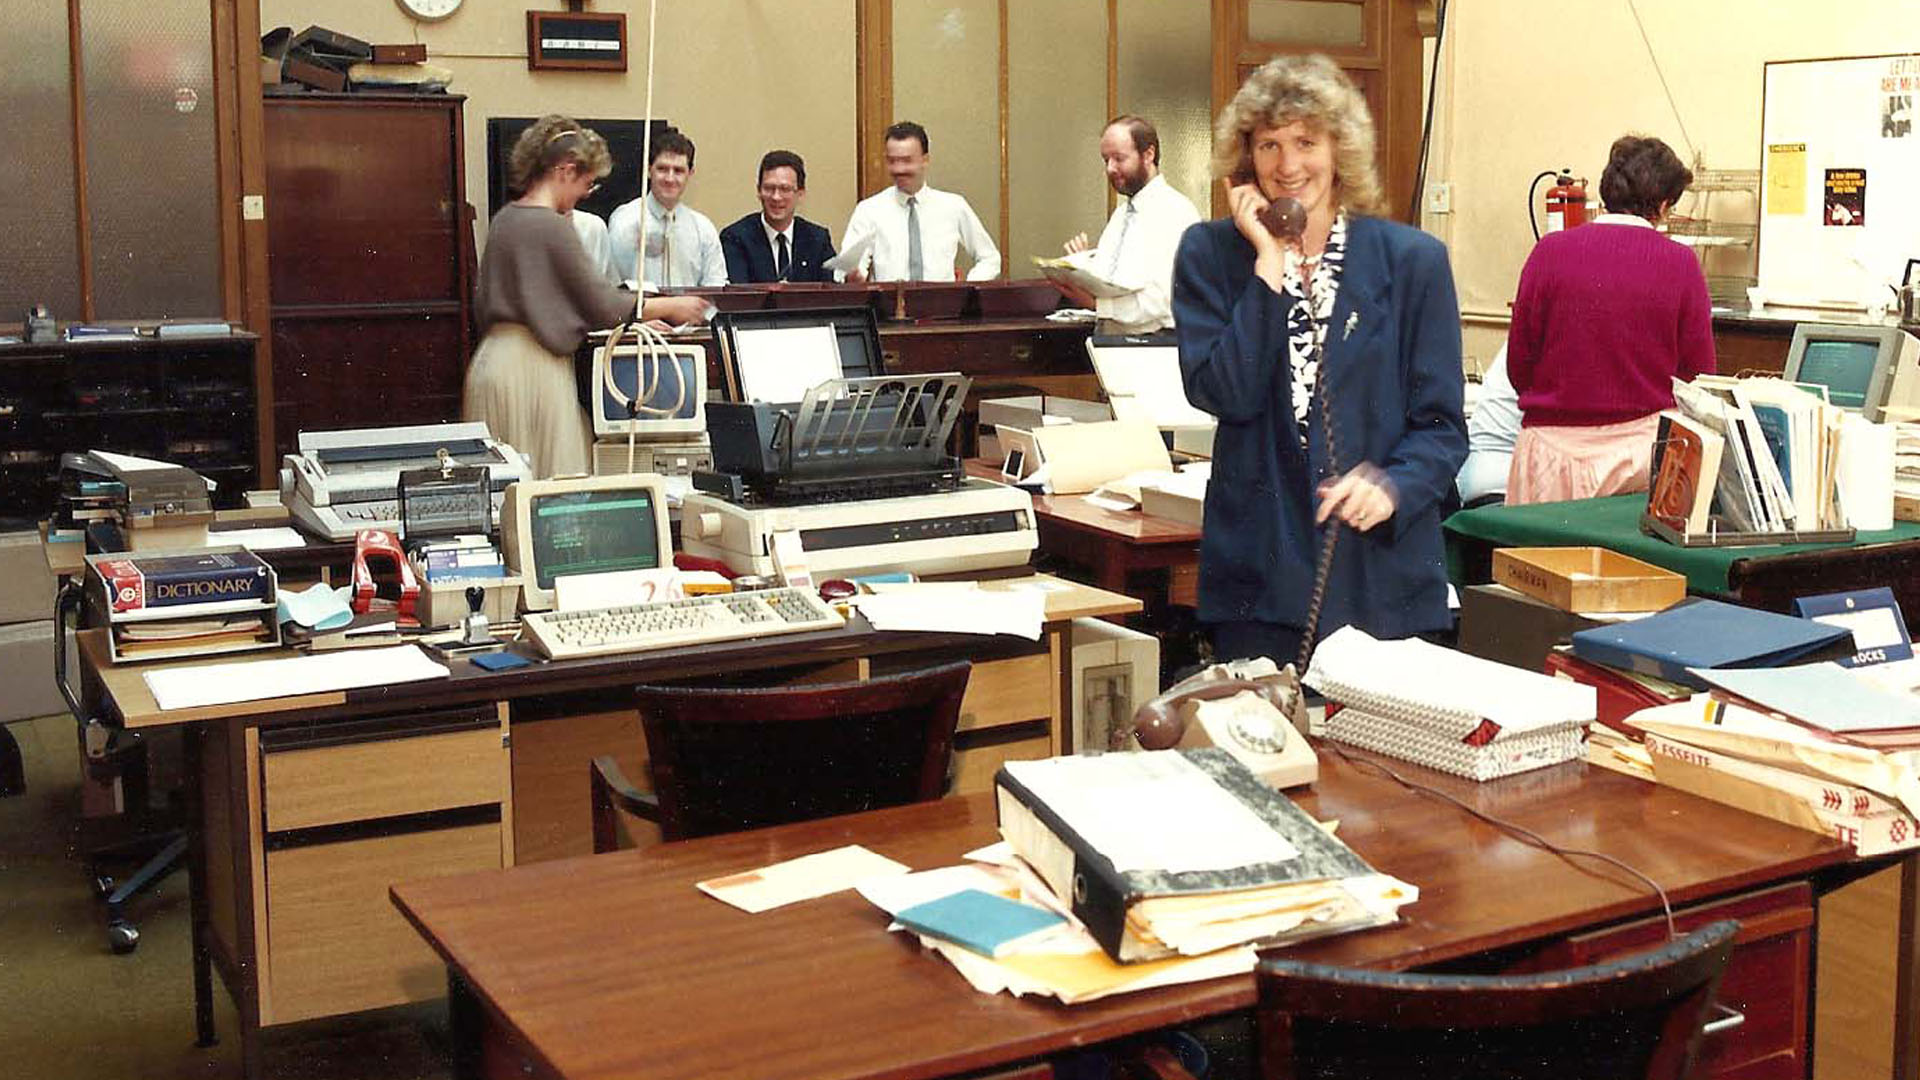 H&W Secretary's Office, about 1987.